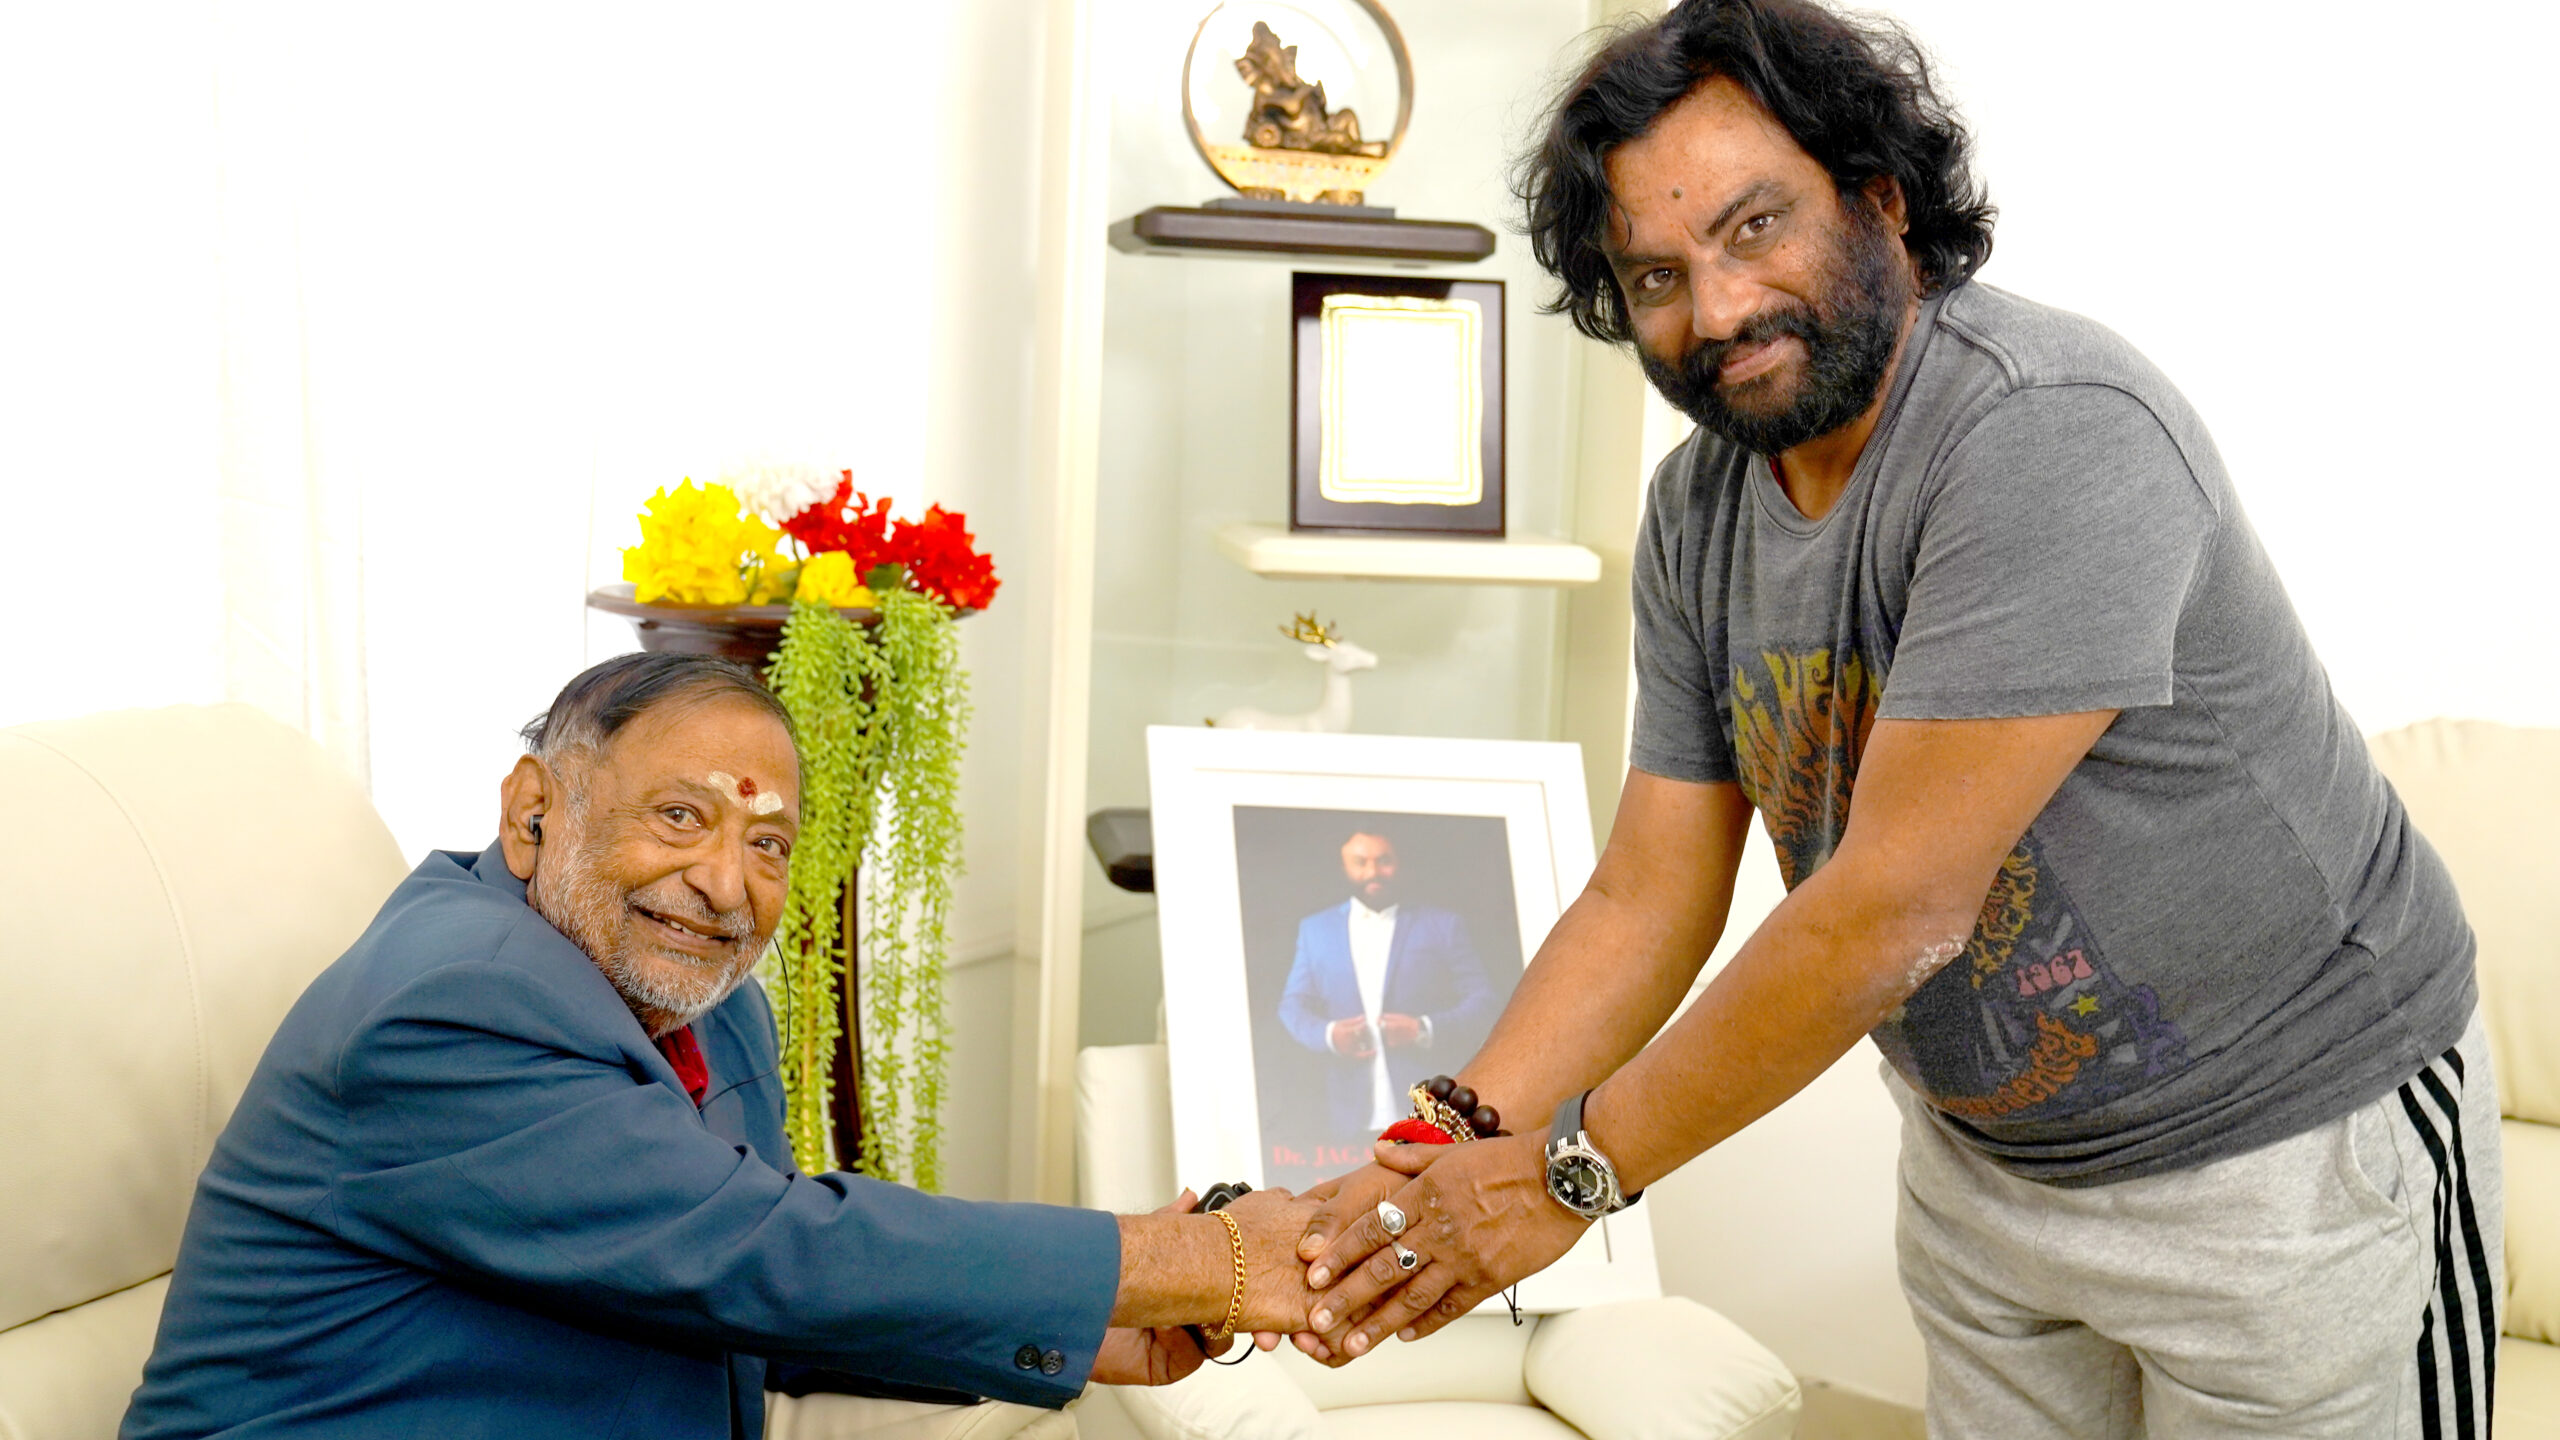 Chandramohan reminisced the memories with Super Star Krishna